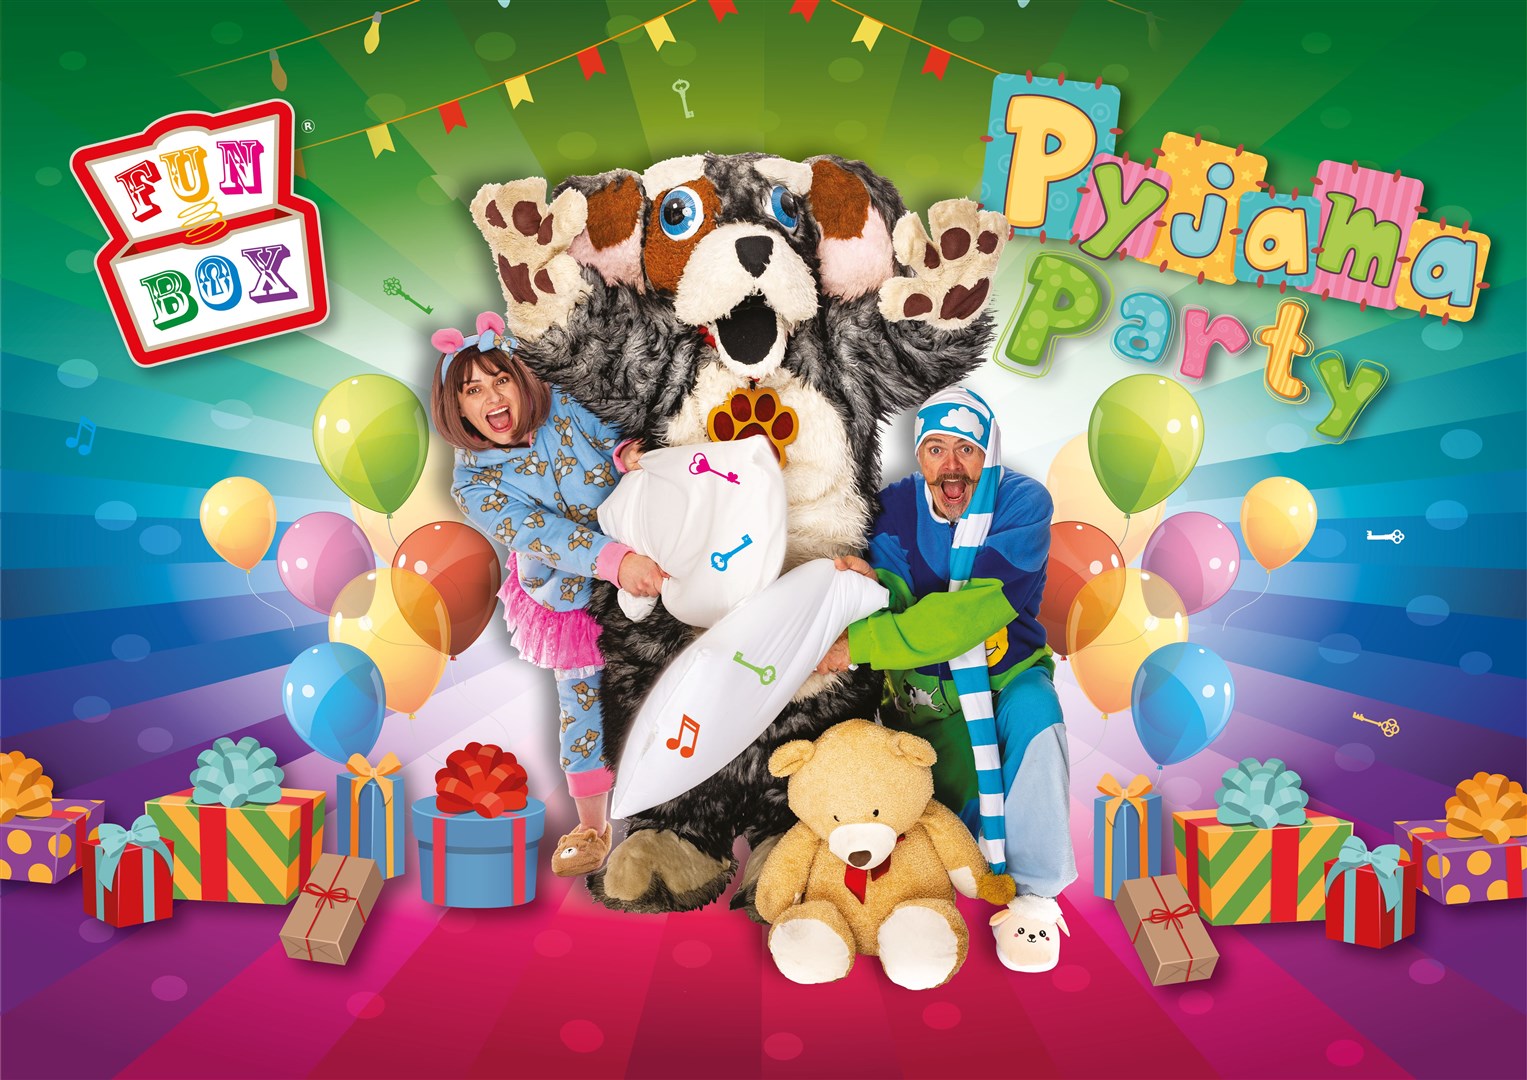 Funbox will present Pyjama Party at Elgin Town Hall on January 15.